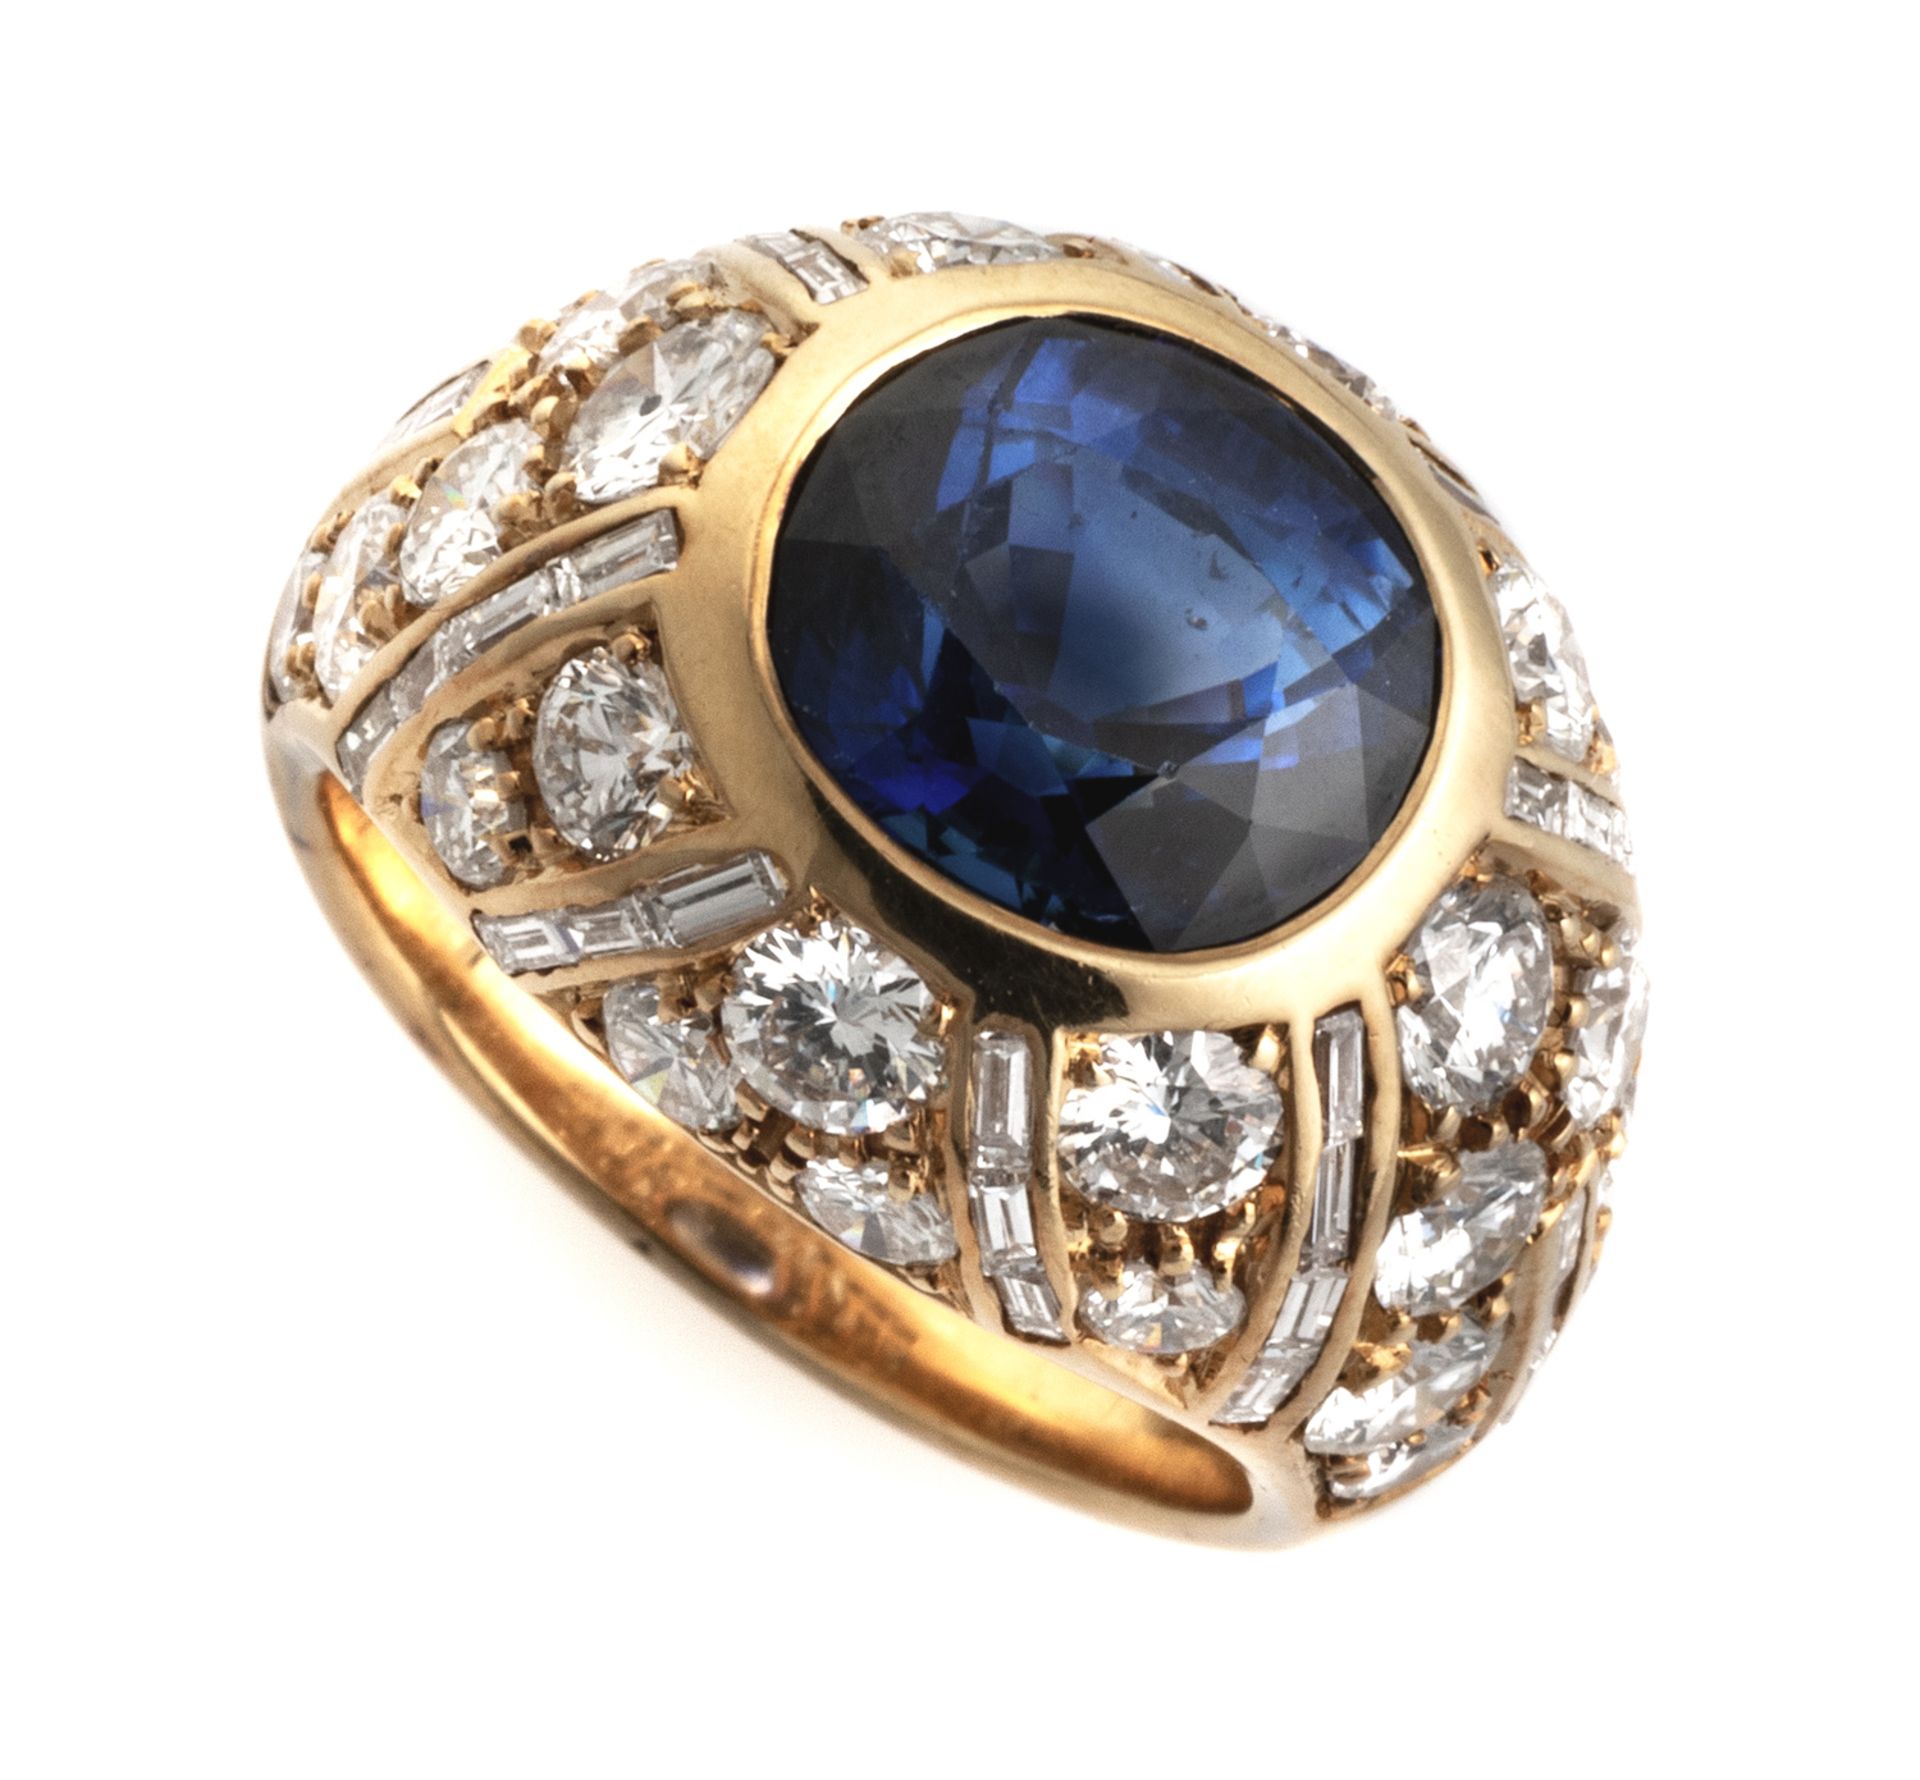 MAGNIFICENT GOLD RING WITH CENTRAL SAPPHIRE